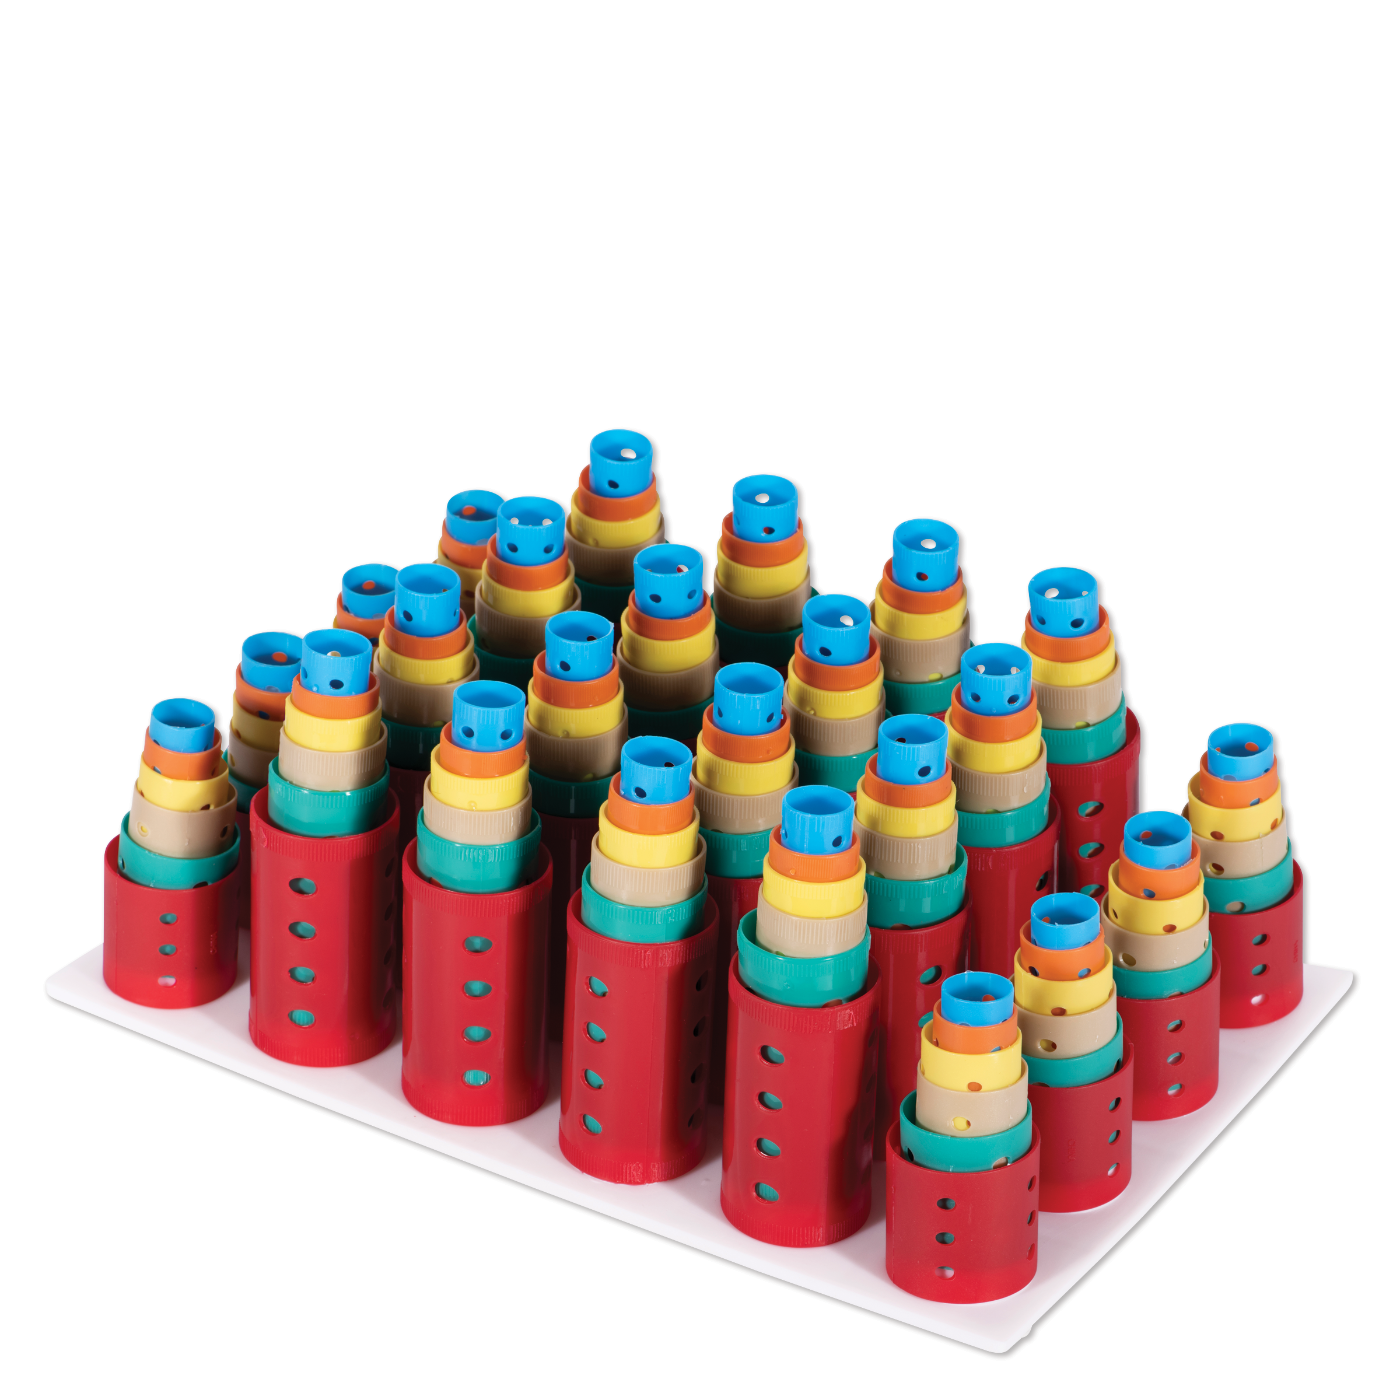 Smooth Rollers with Storage Rack - 12 dz.